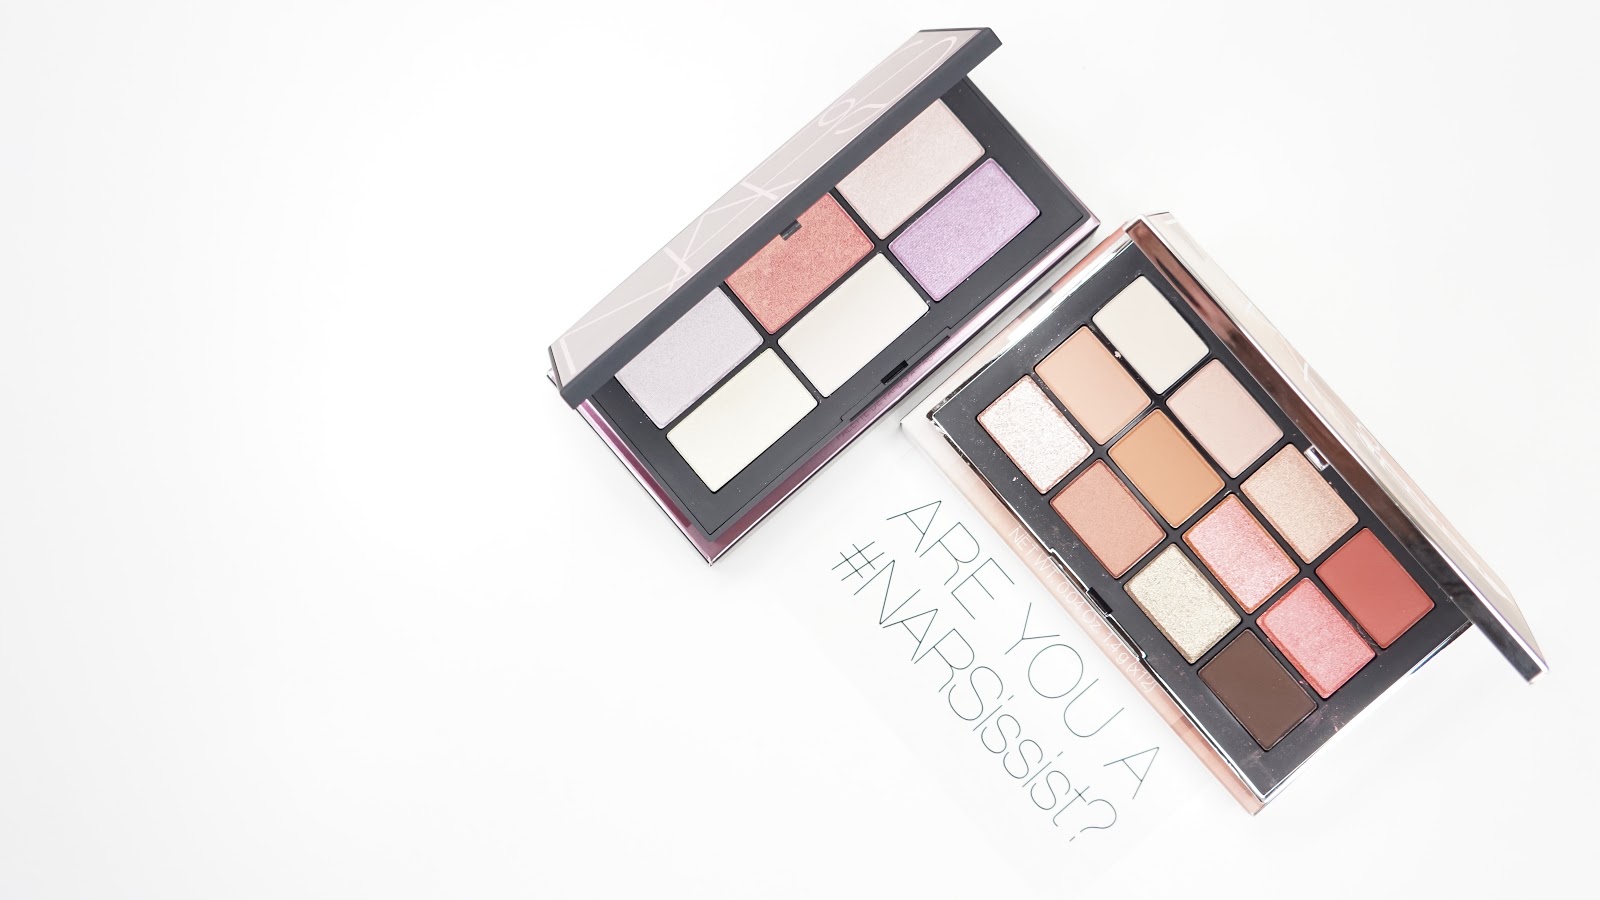 Eyes on Nars Cosmetics ft. the Wanted and Danger Control Palettes